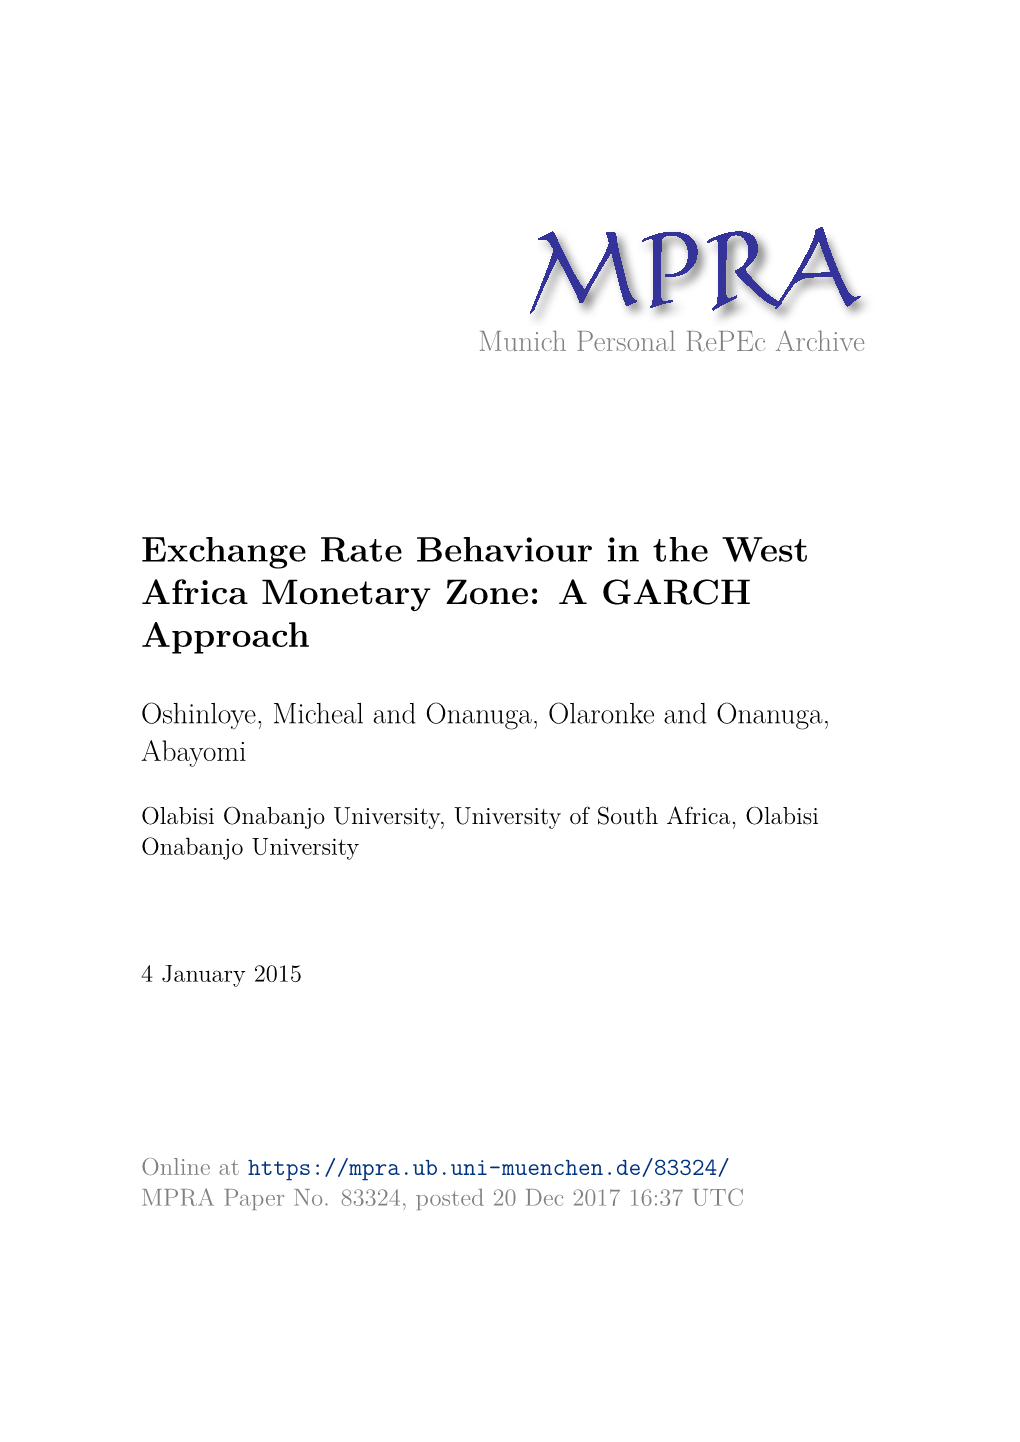 Exchange Rate Behaviour in the West Africa Monetary Zone: a GARCH Approach